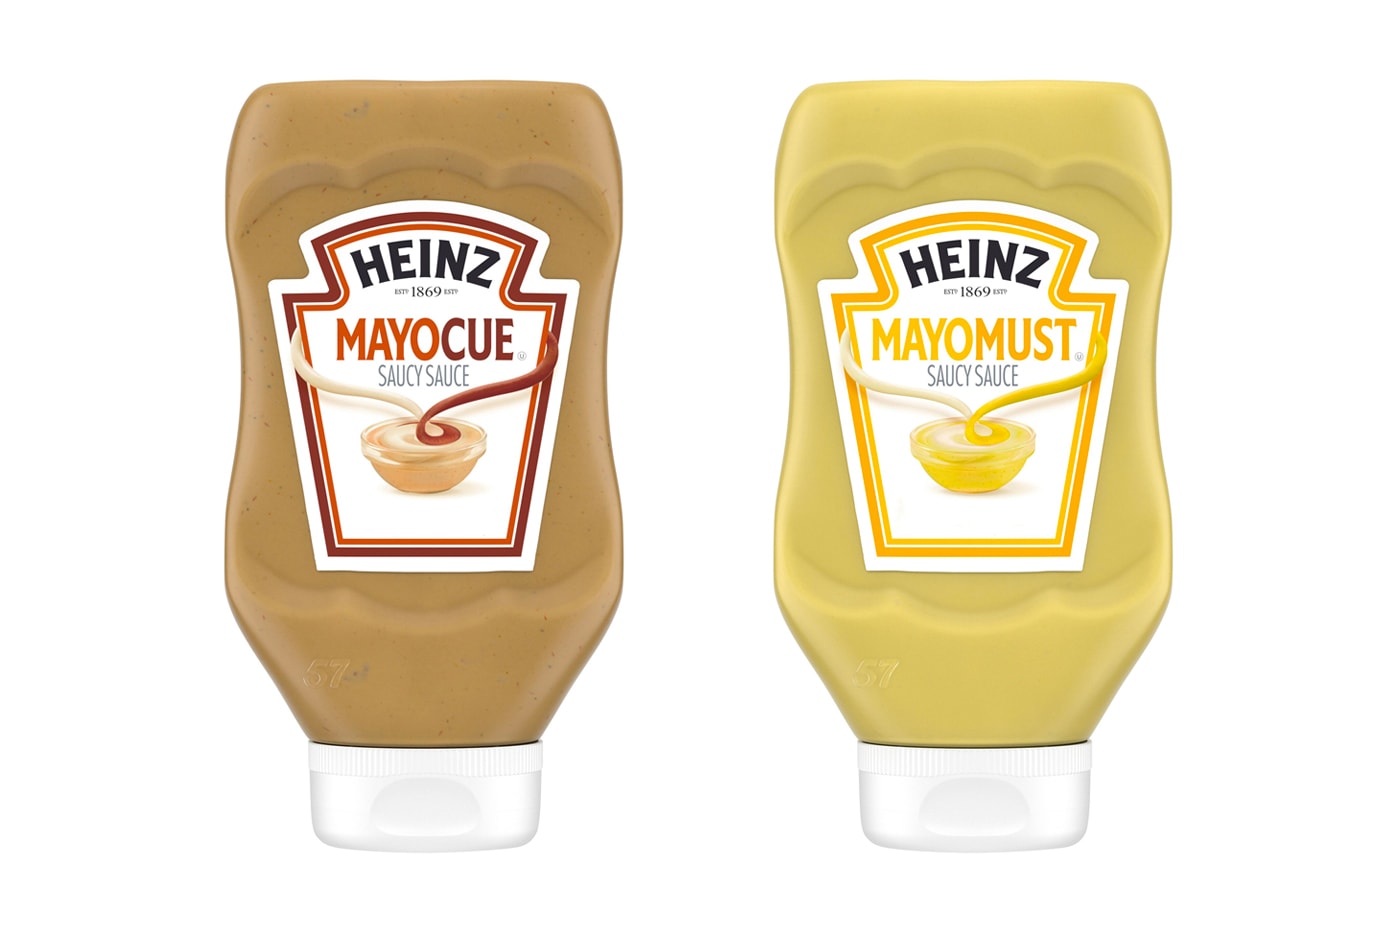 And last night I dreamed I was a bottle of ketchup. And you were mustard.  Which is weird, because usually you're mayonnaise in my dreams. Why do you  suppose that is? 